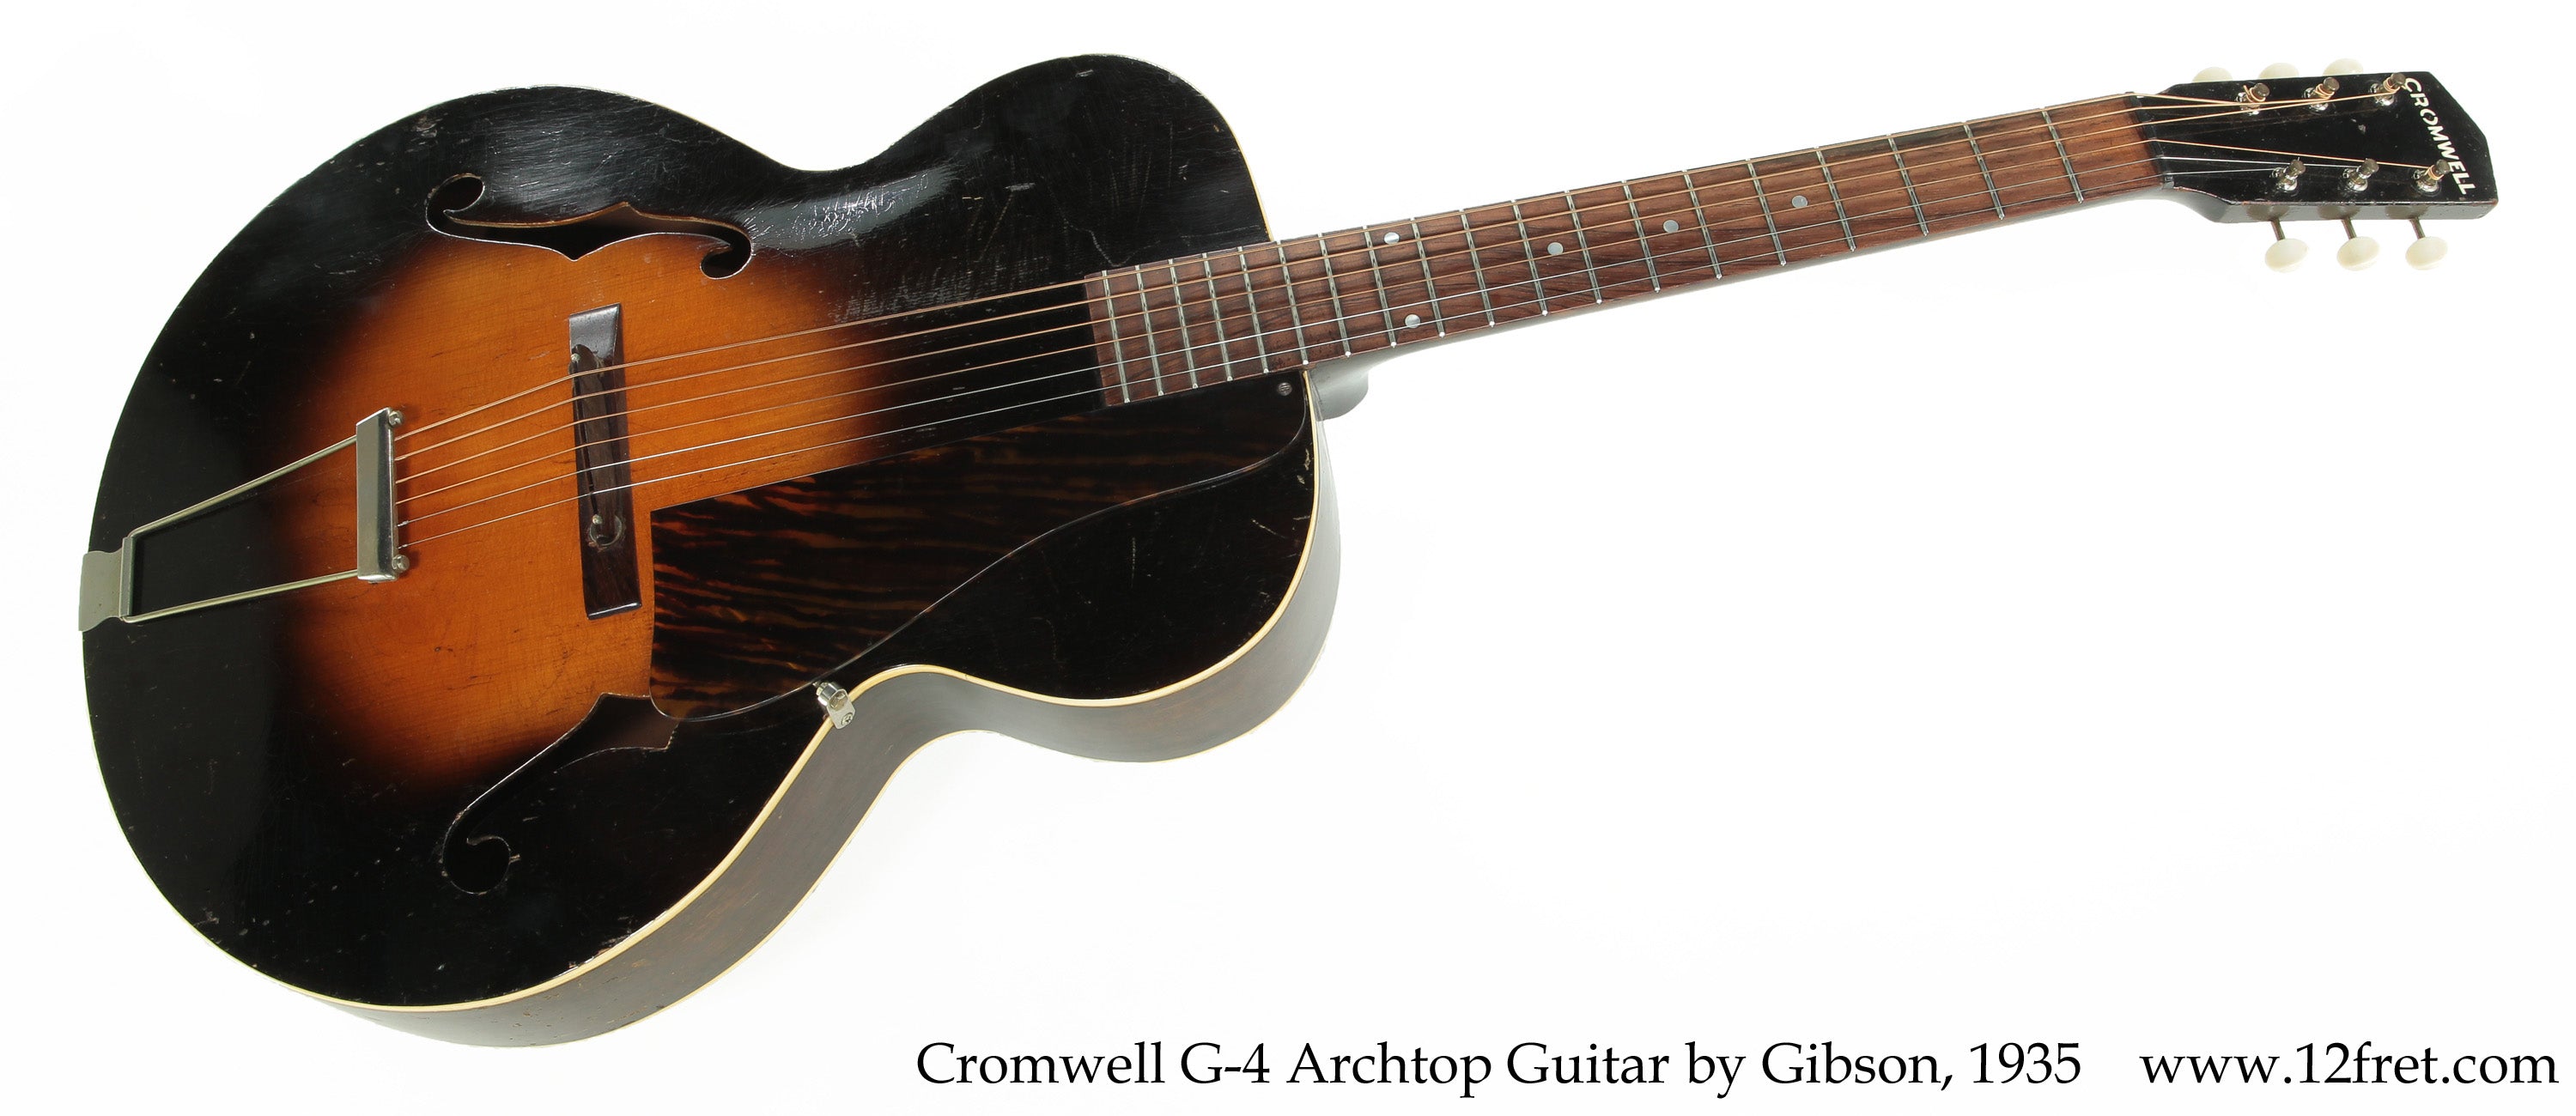 Cromwell G-4 Archtop Guitar by Gibson, 1935 - The Twelfth Fret